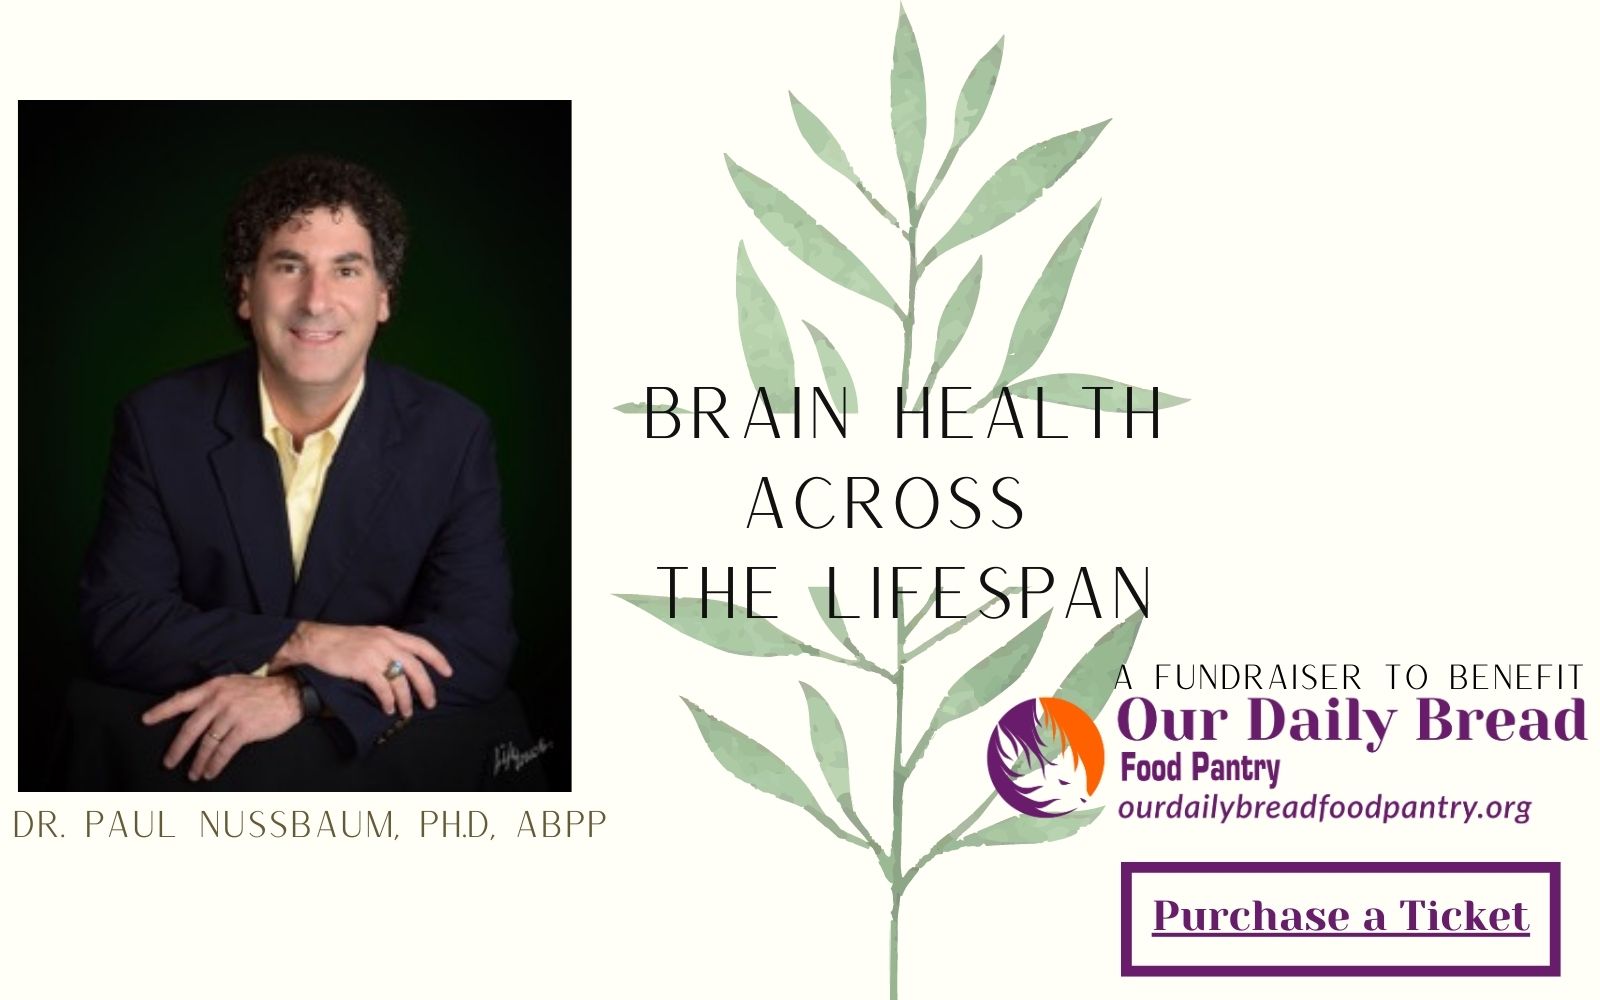 Brain Health Across The Lifespan Fundraiser For Our Daily Bread Food Pantry